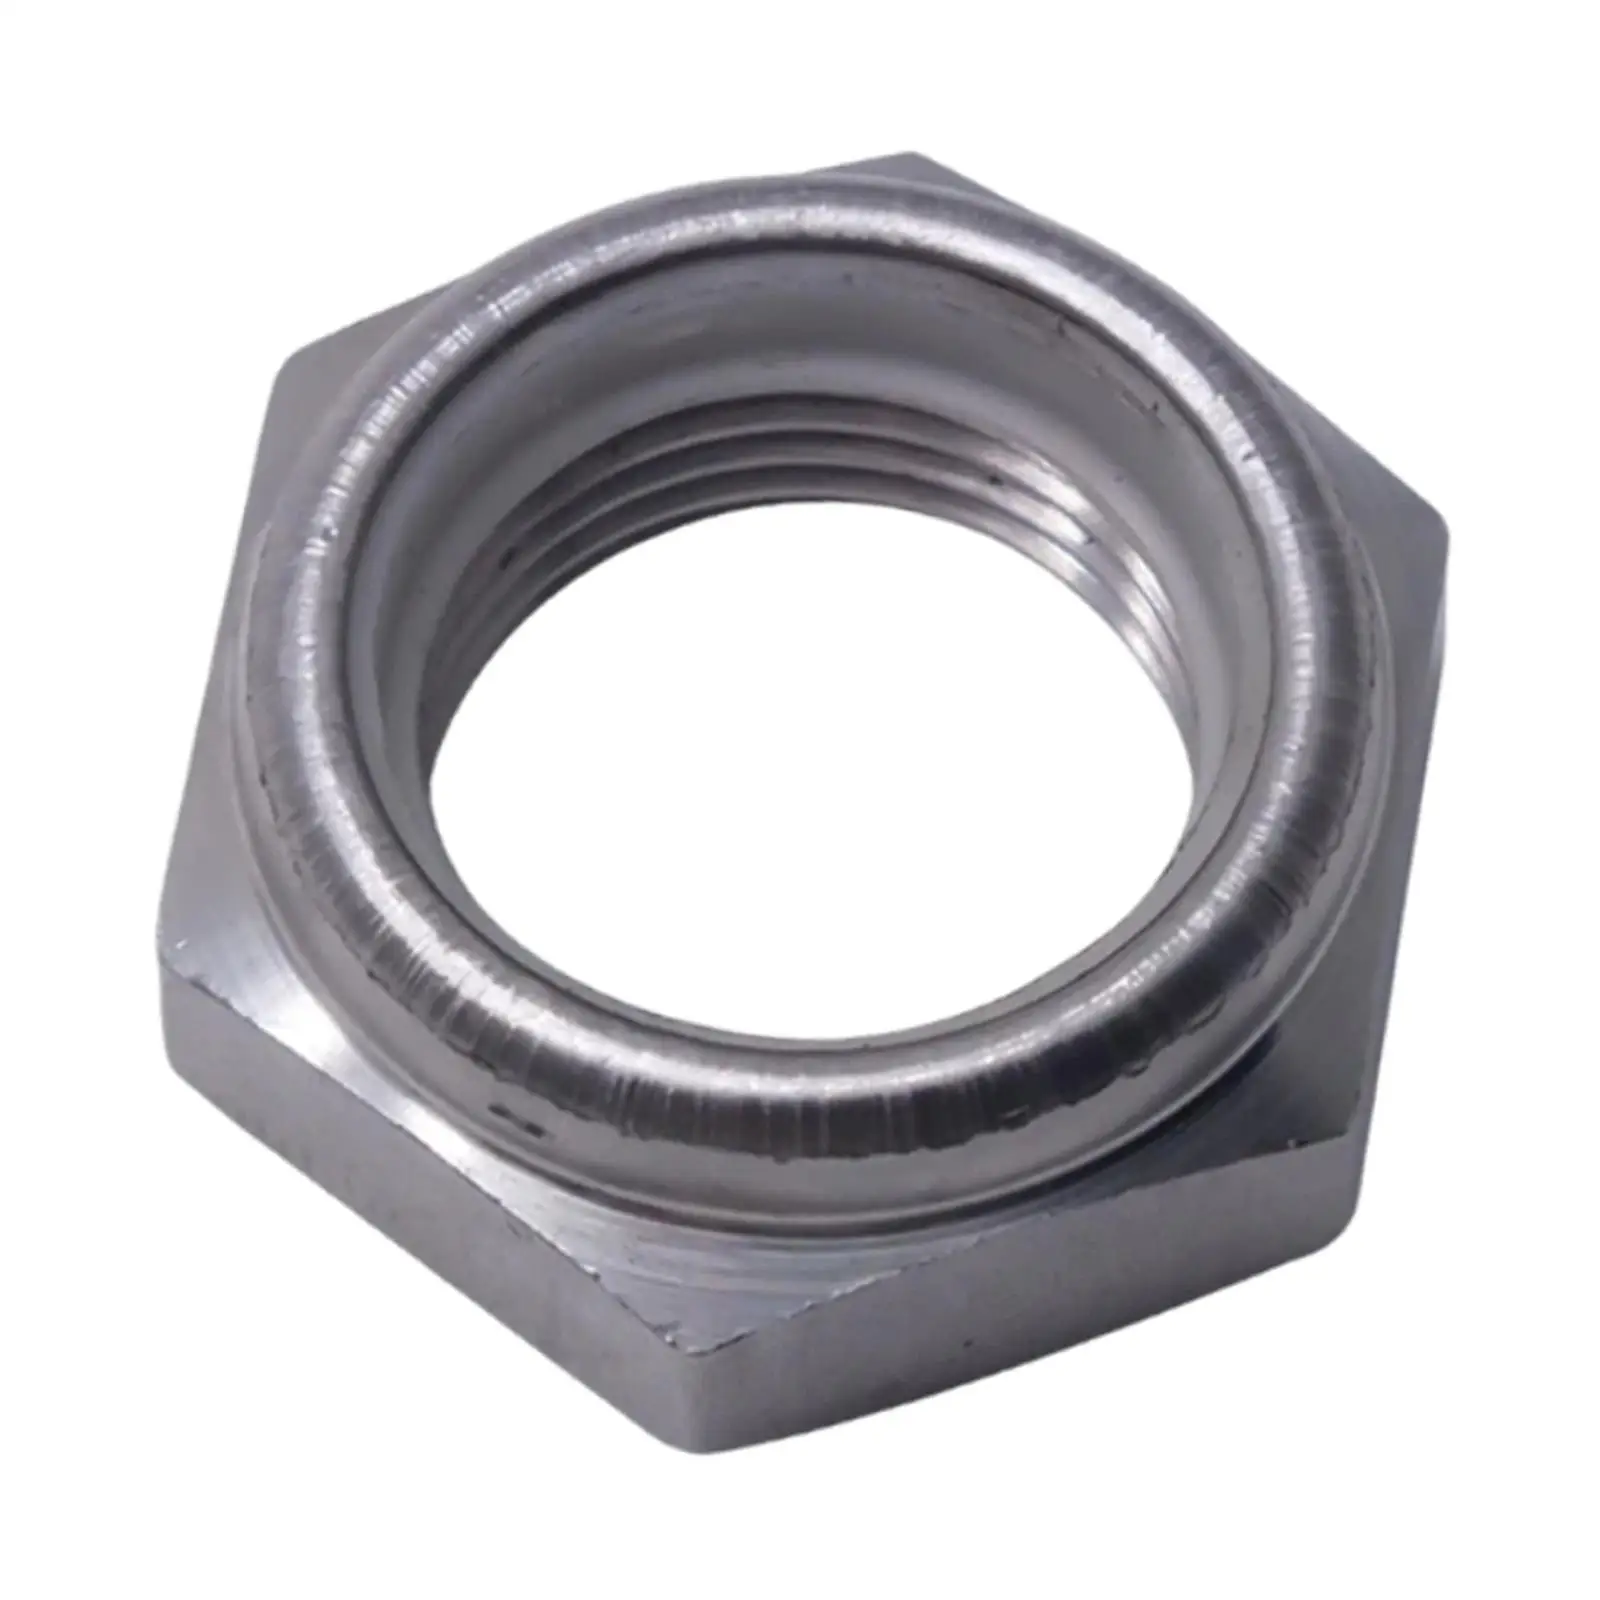 Self Locking Nut Replace 90185-22043 90185-22043-00 Hex Locknut Stainless for